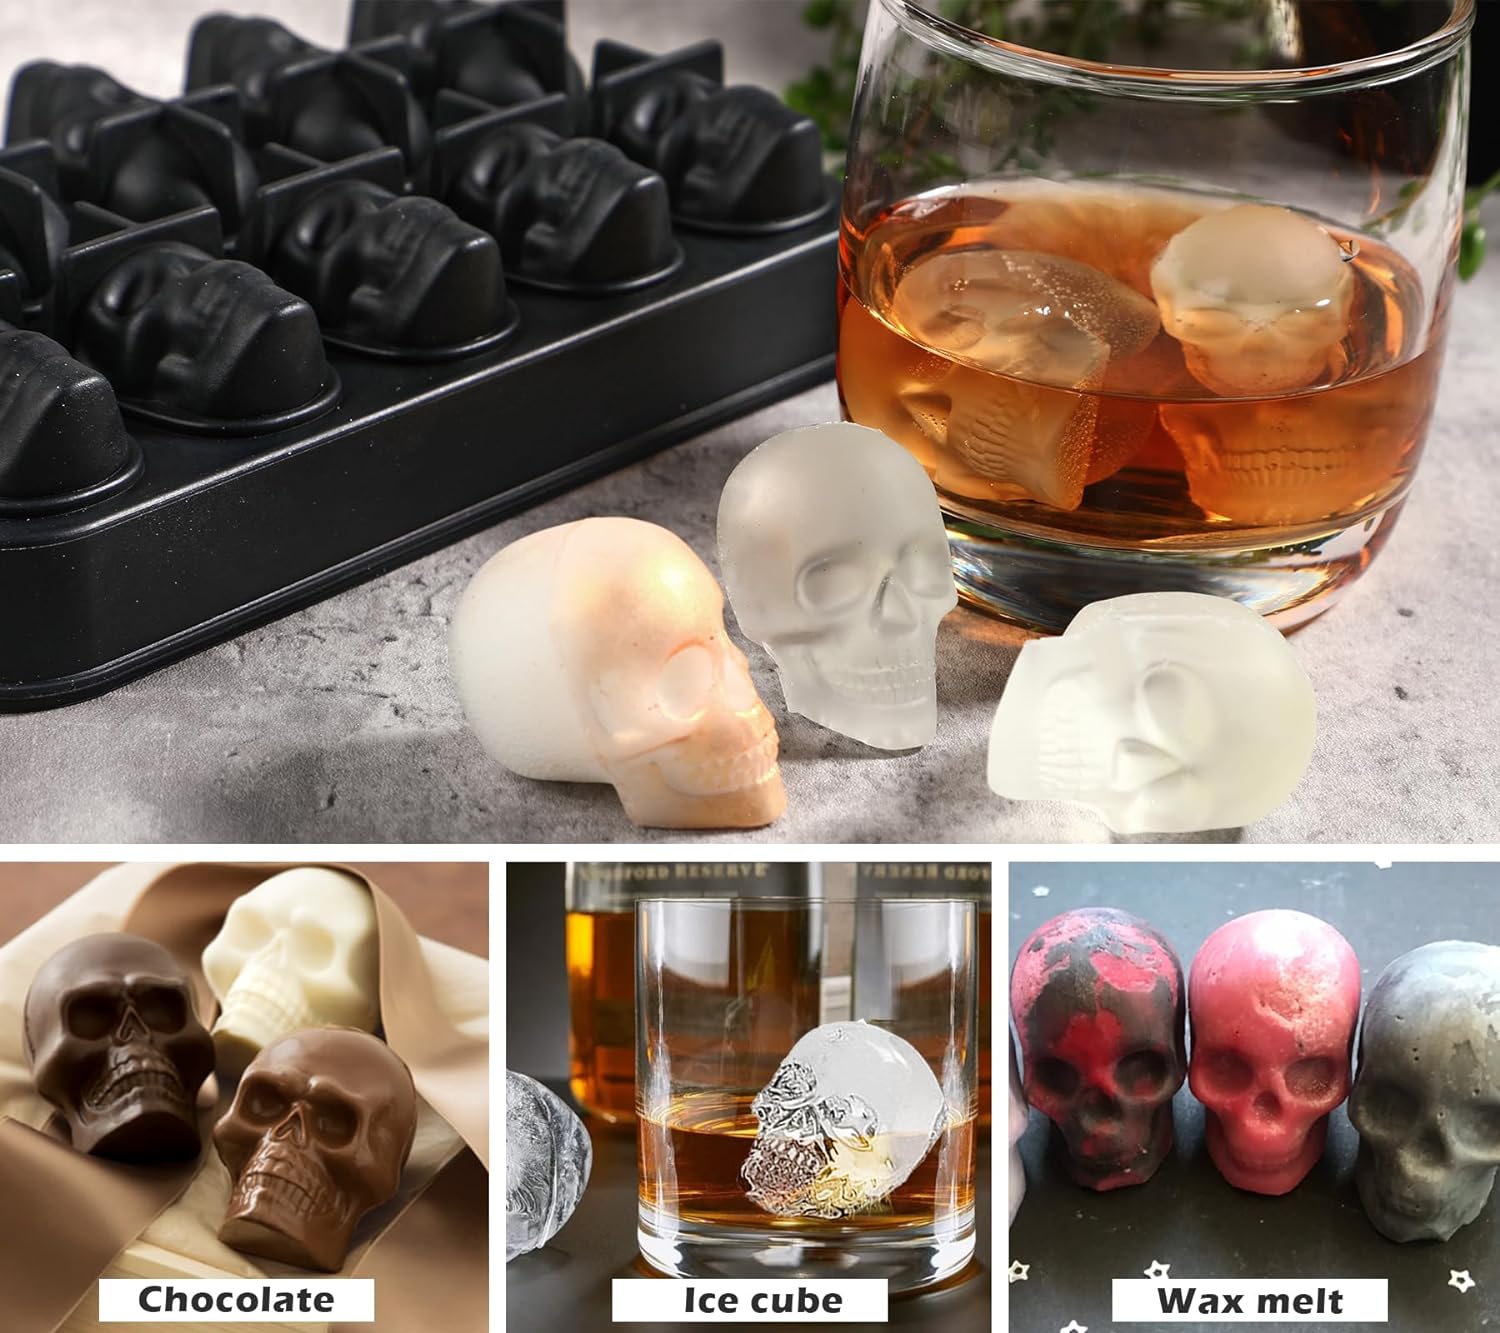 Webake Skull Ice Cube Mold, 10 Cavity Silicone Ice Mold with Lid for  Whiskey Skull Ice